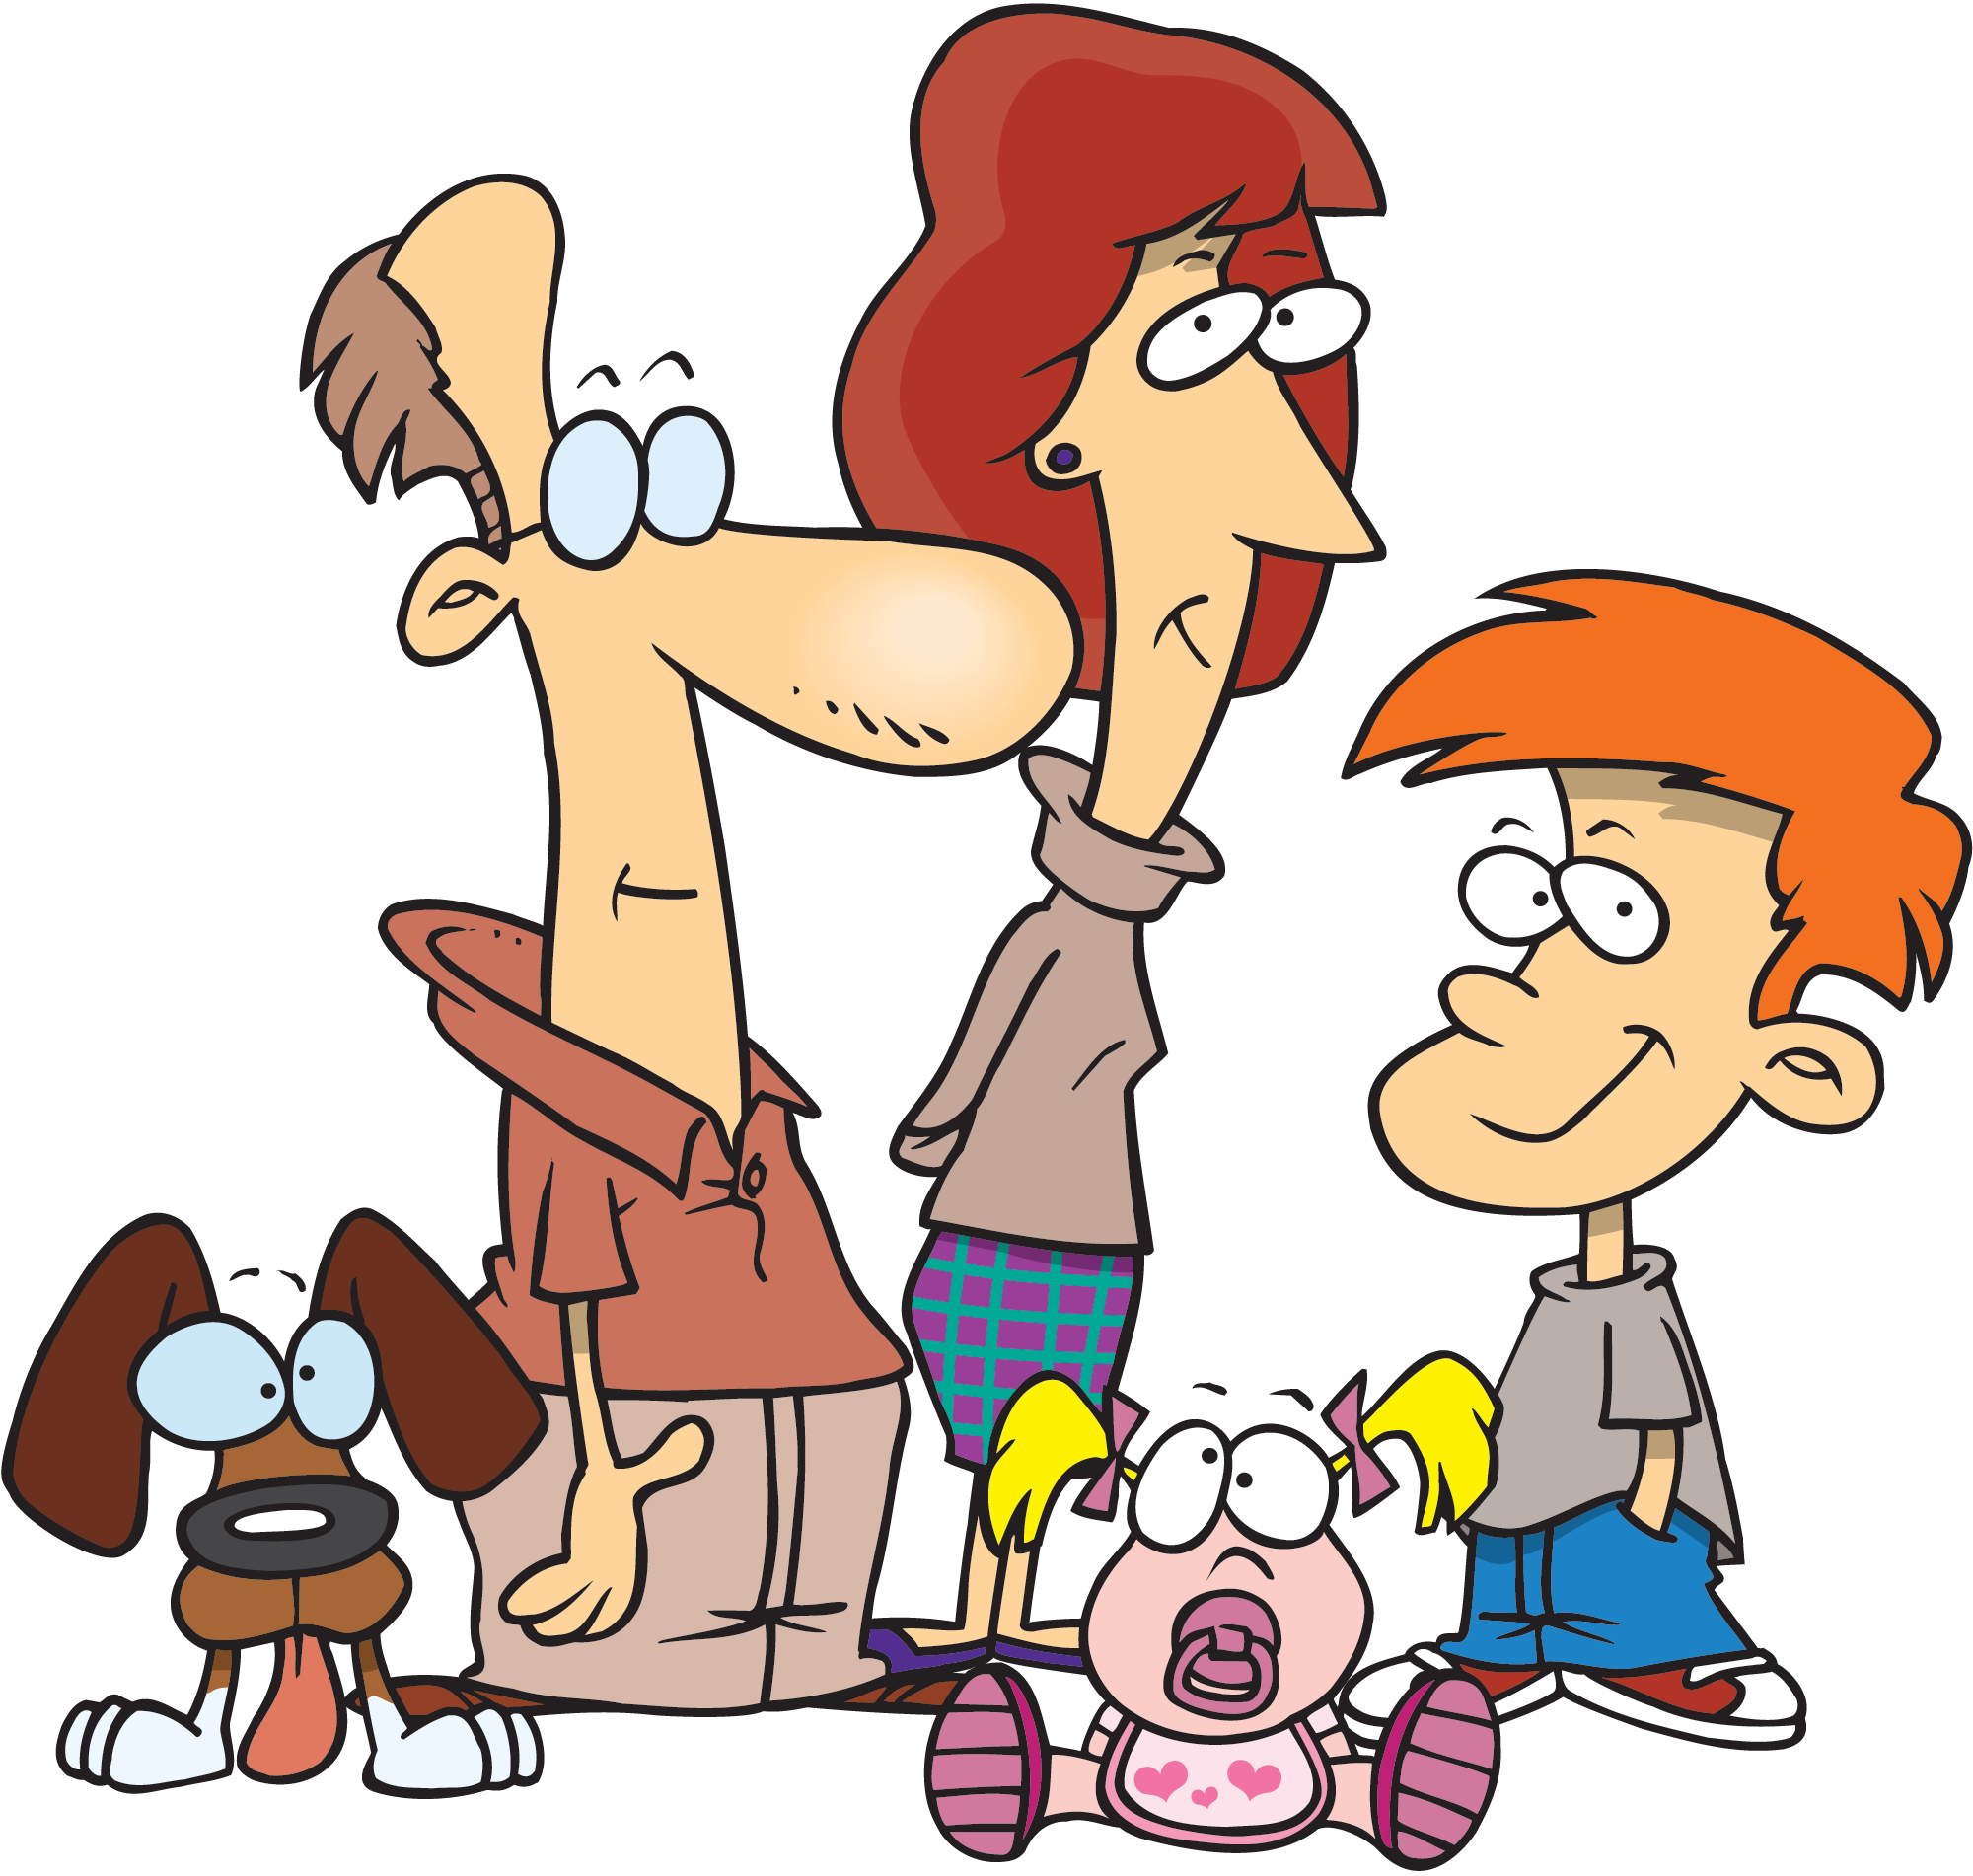 Cartoon Family Images - ClipArt Best